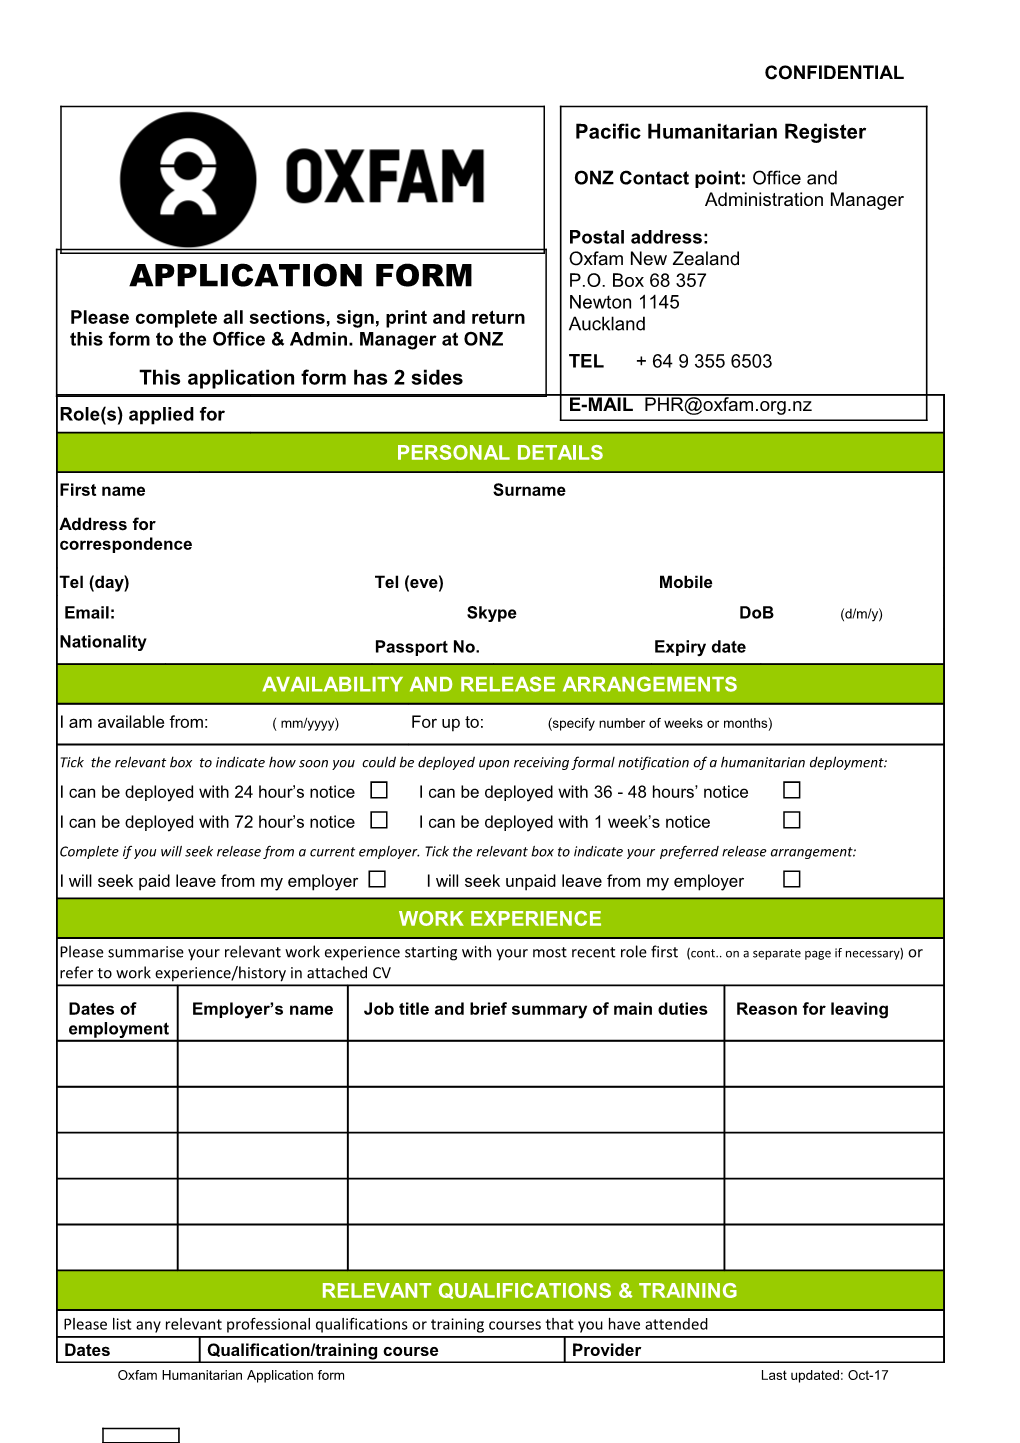 Oxfam Humanitarianapplication Form Last Updated: Oct-17